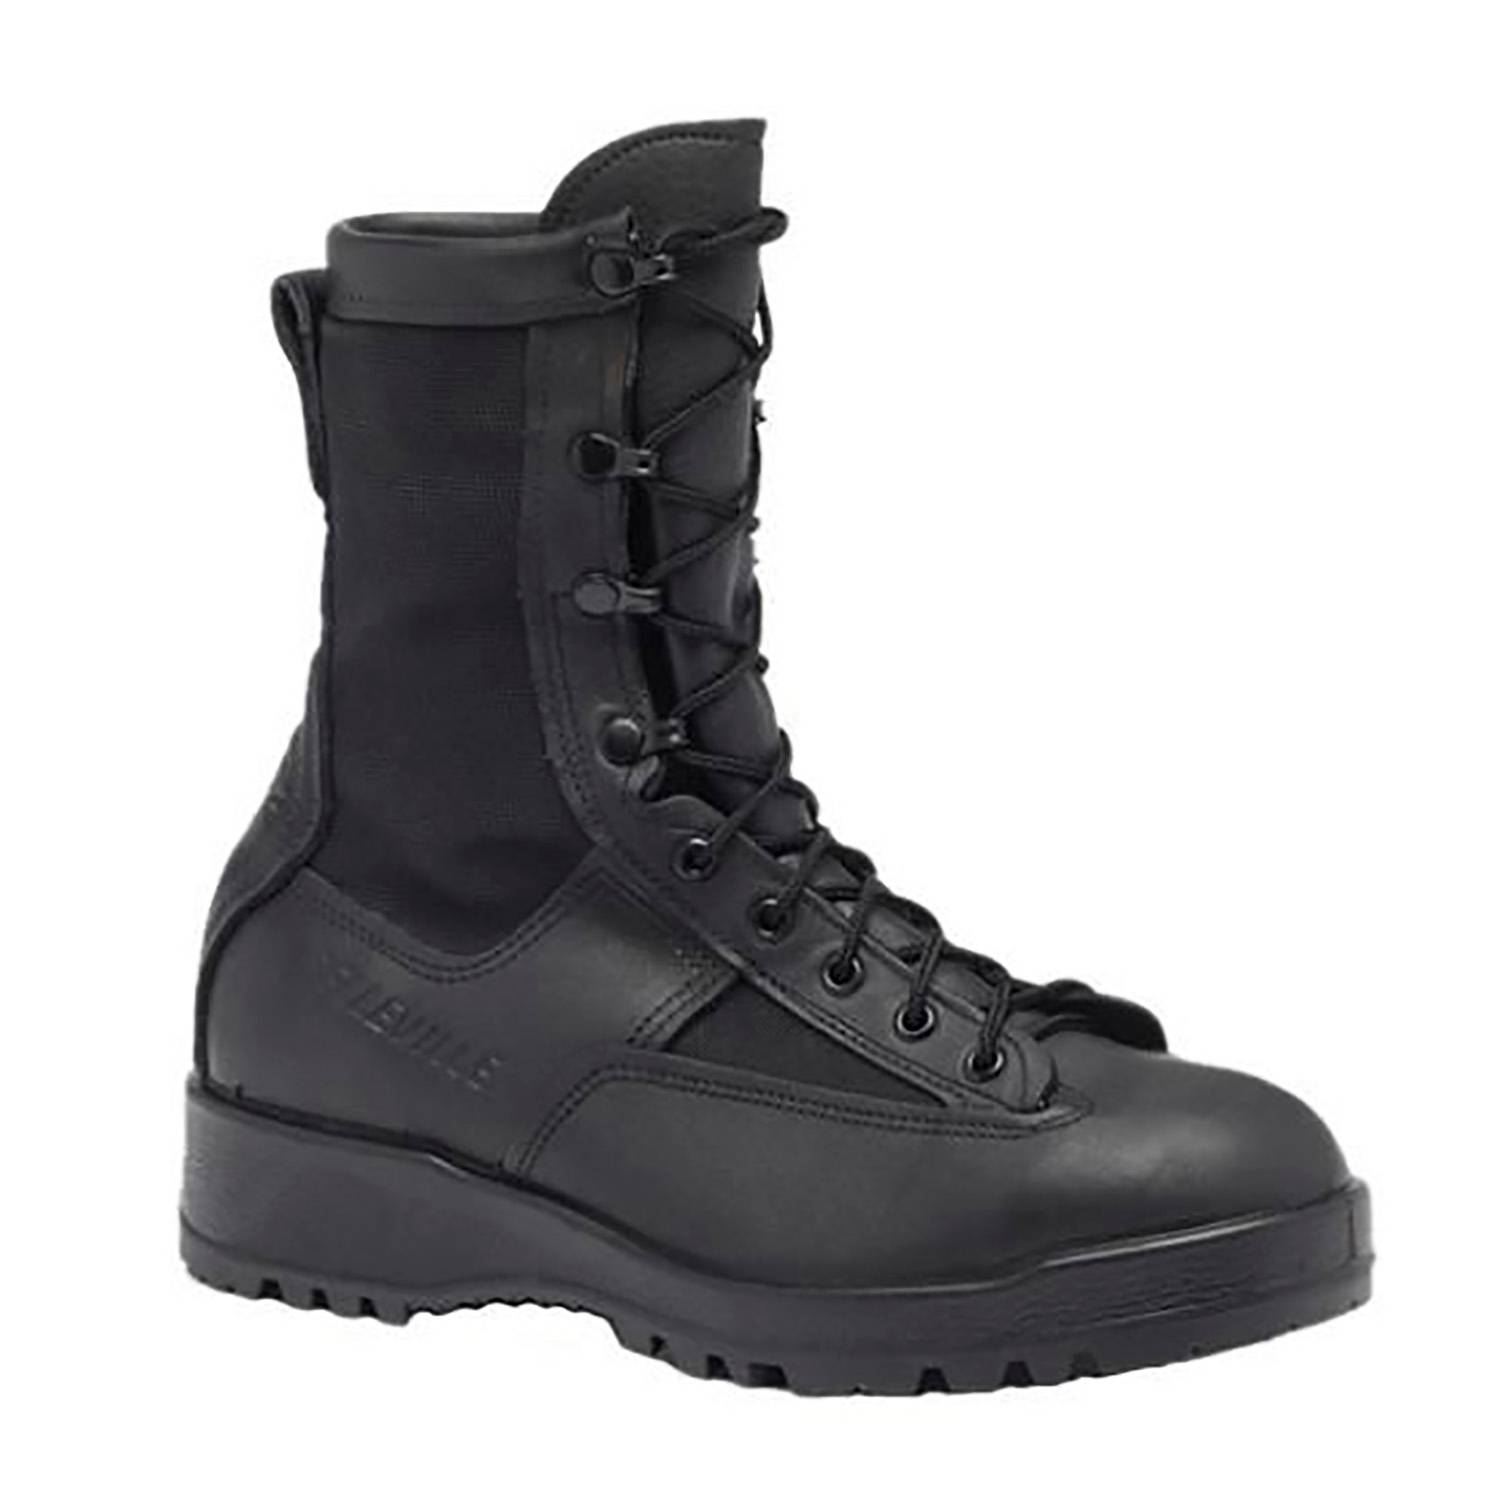 Belleville Waterproof Black Insulated Safety Toe Boot